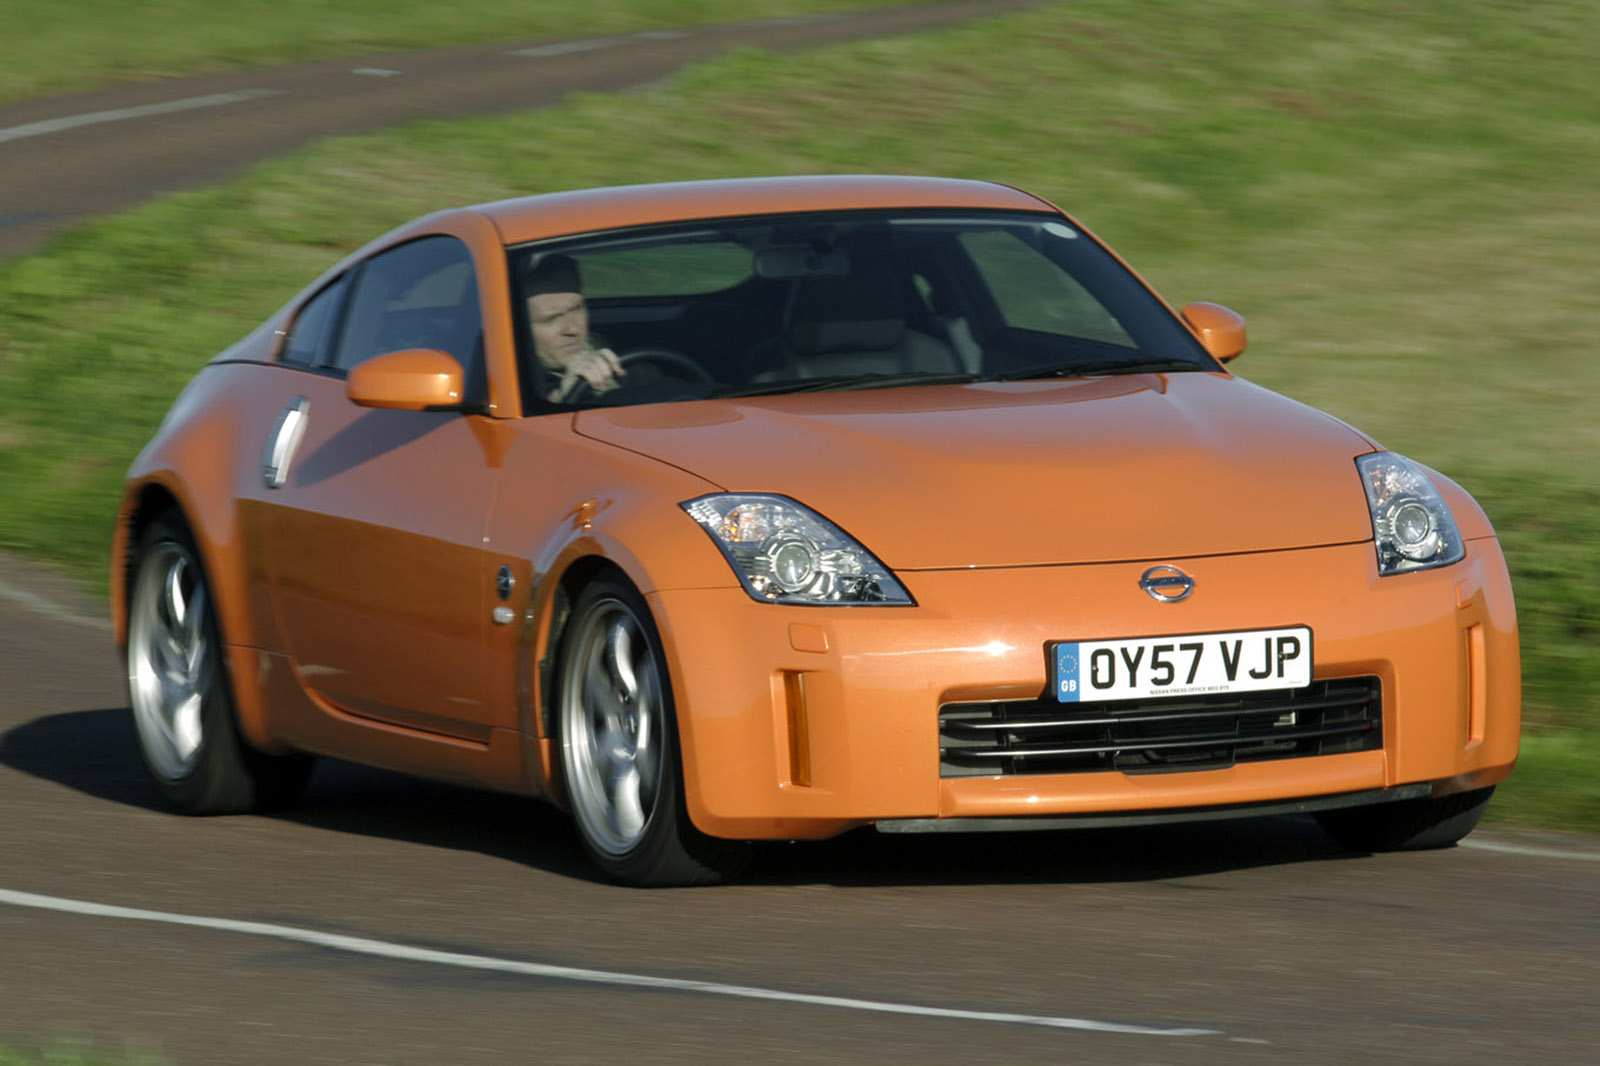 Used car buying guide Nissan 350Z Autocar